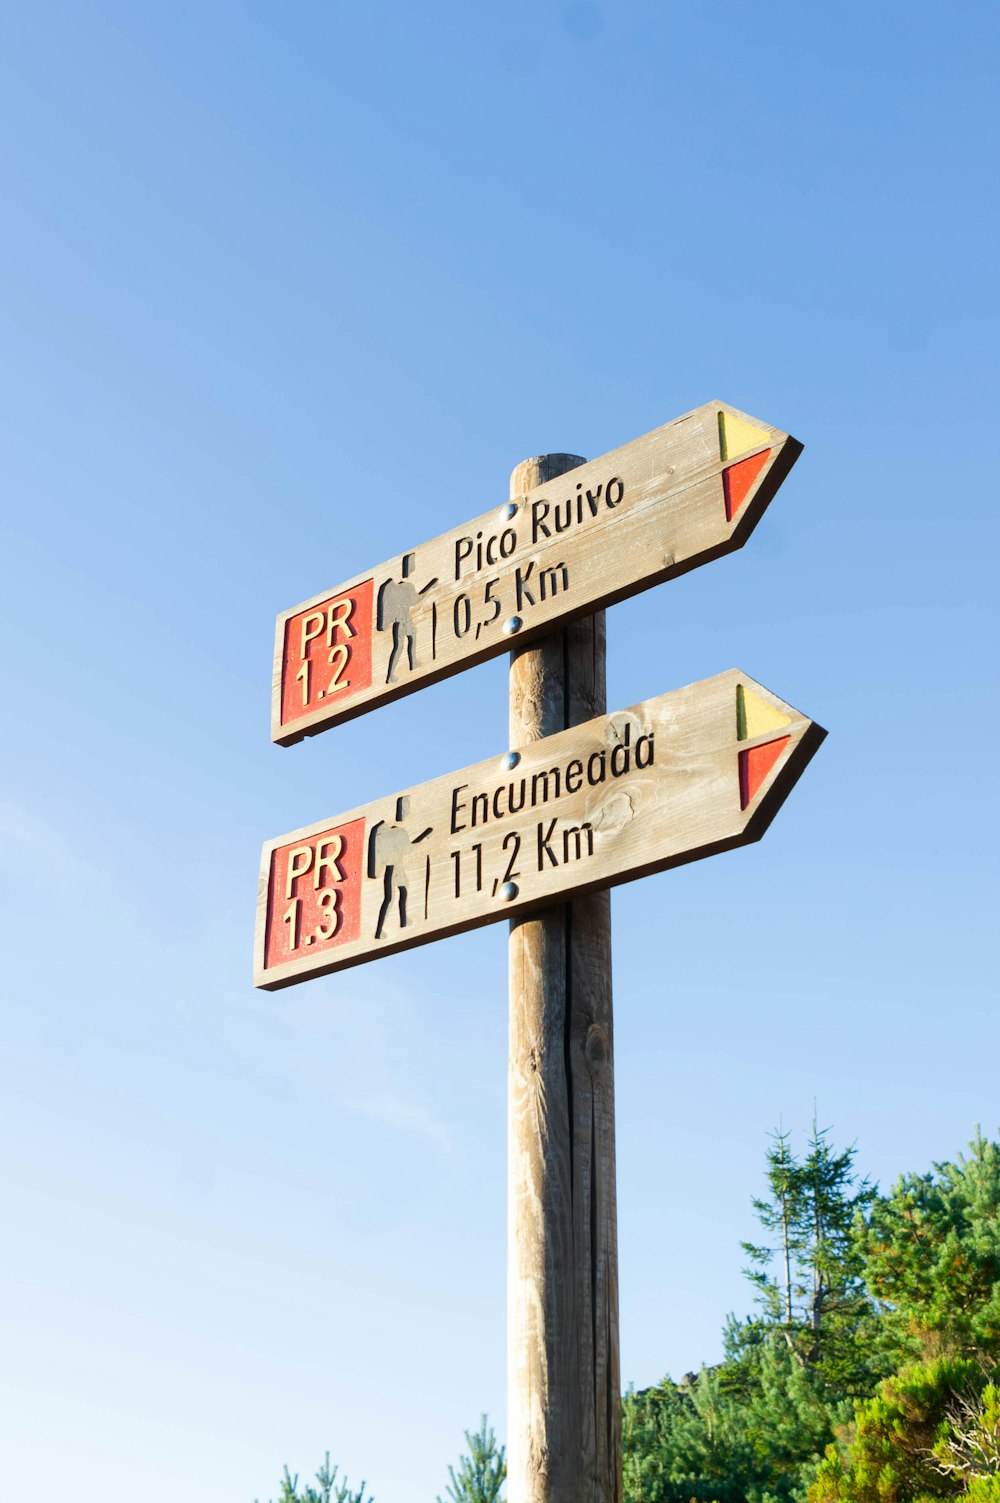 a wooden pole with three signs pointing in different directions